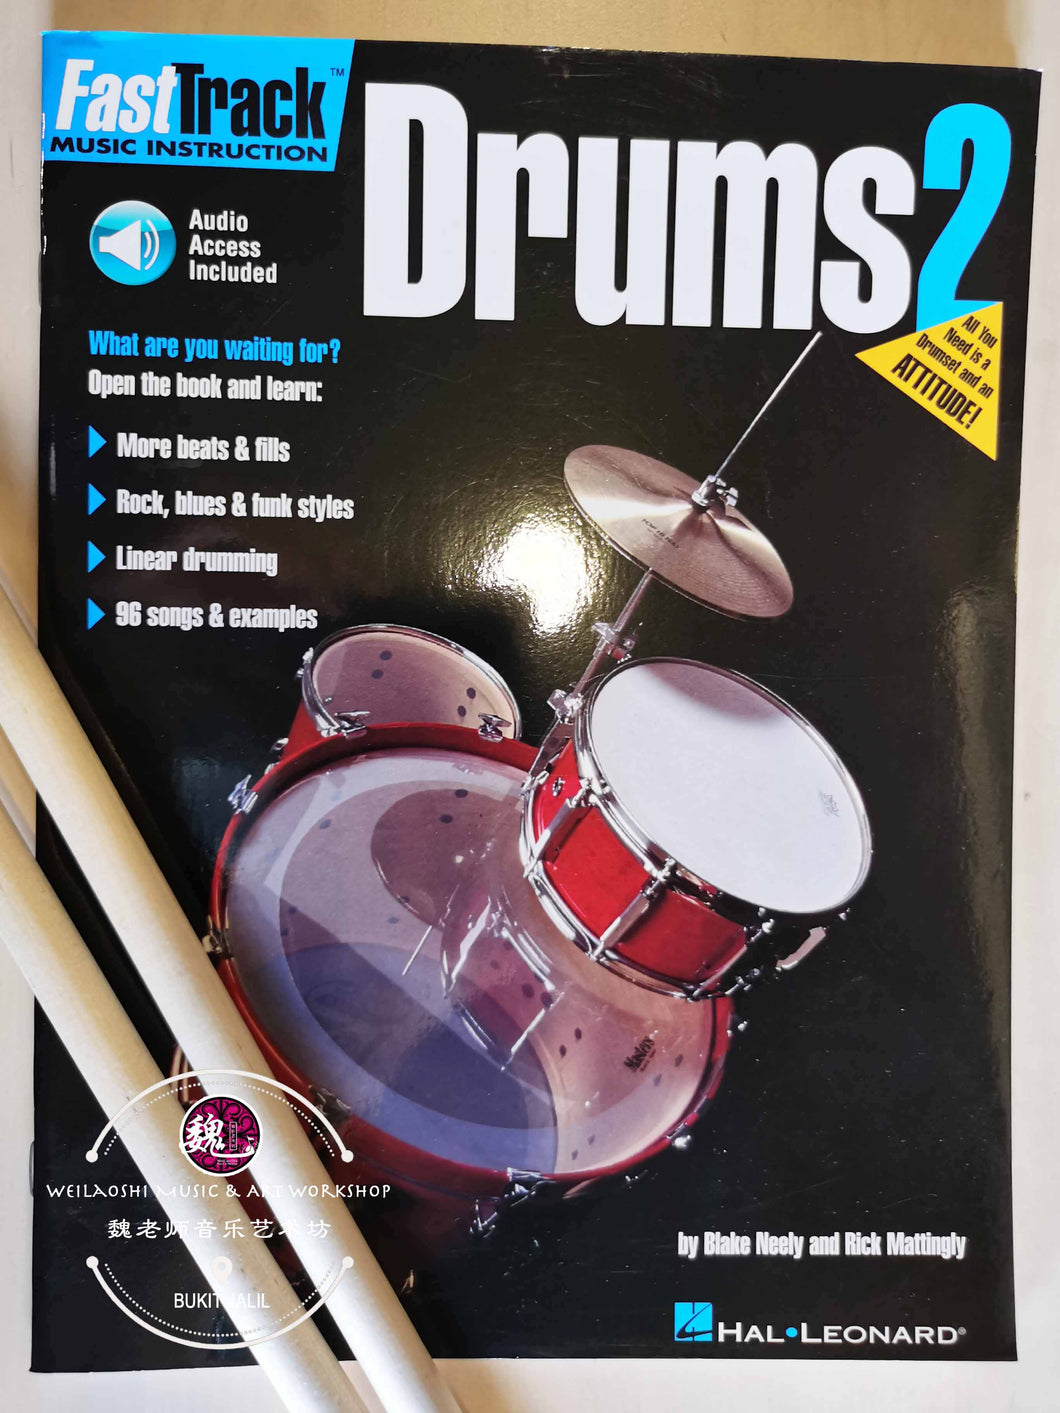 Fast Track Music Instruction Drums 2 by Hal Leonard